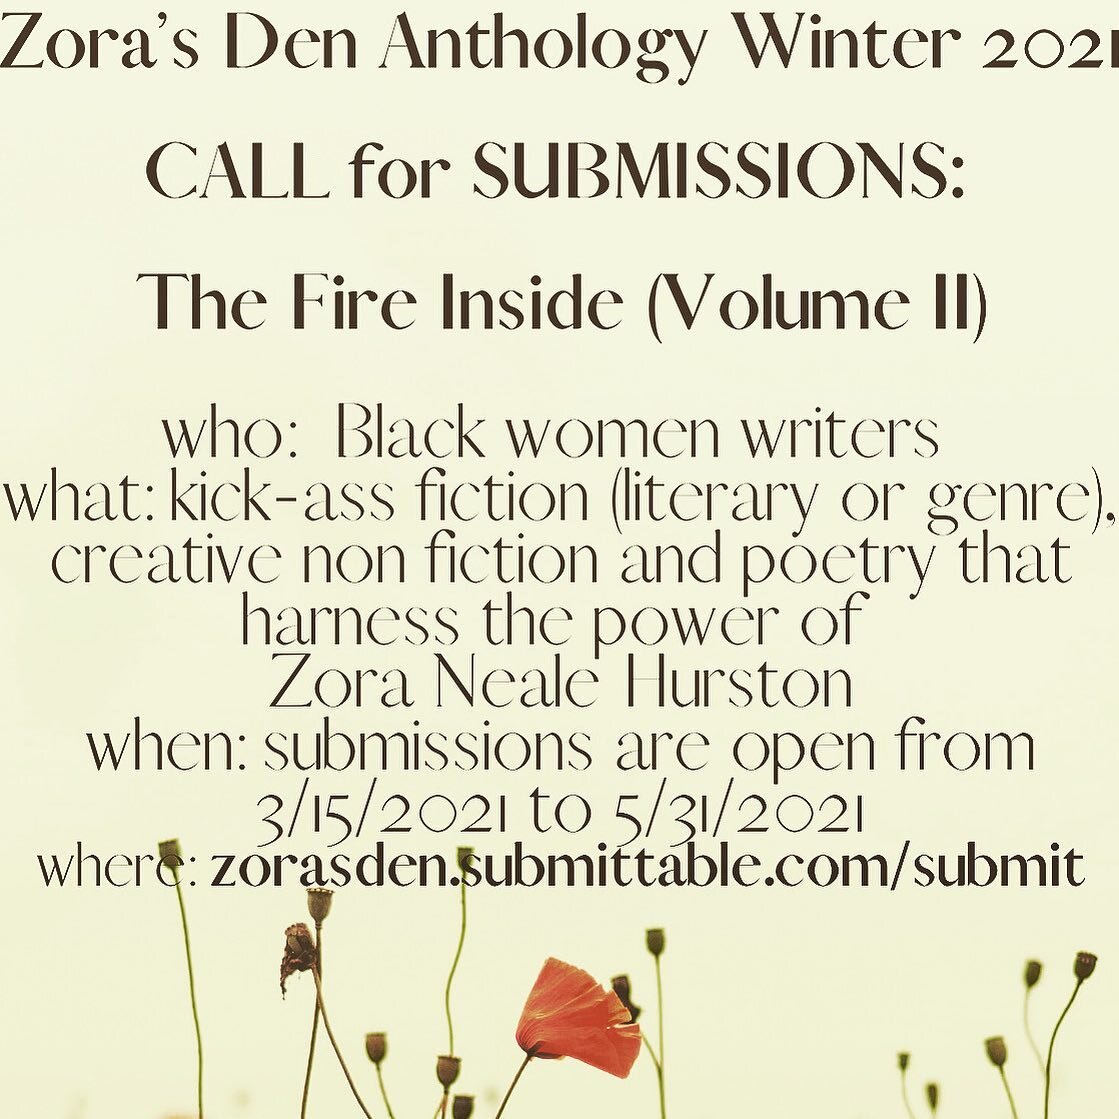 Submissions are open for The Fire Inside, Volume II.

Following the success of Zora&rsquo;s Den&rsquo;s first anthology, we want your kick-ass fiction, your soulful non-fiction, and your bold poetry.

Zora Neale Hurston was known for her spunk. Let&r